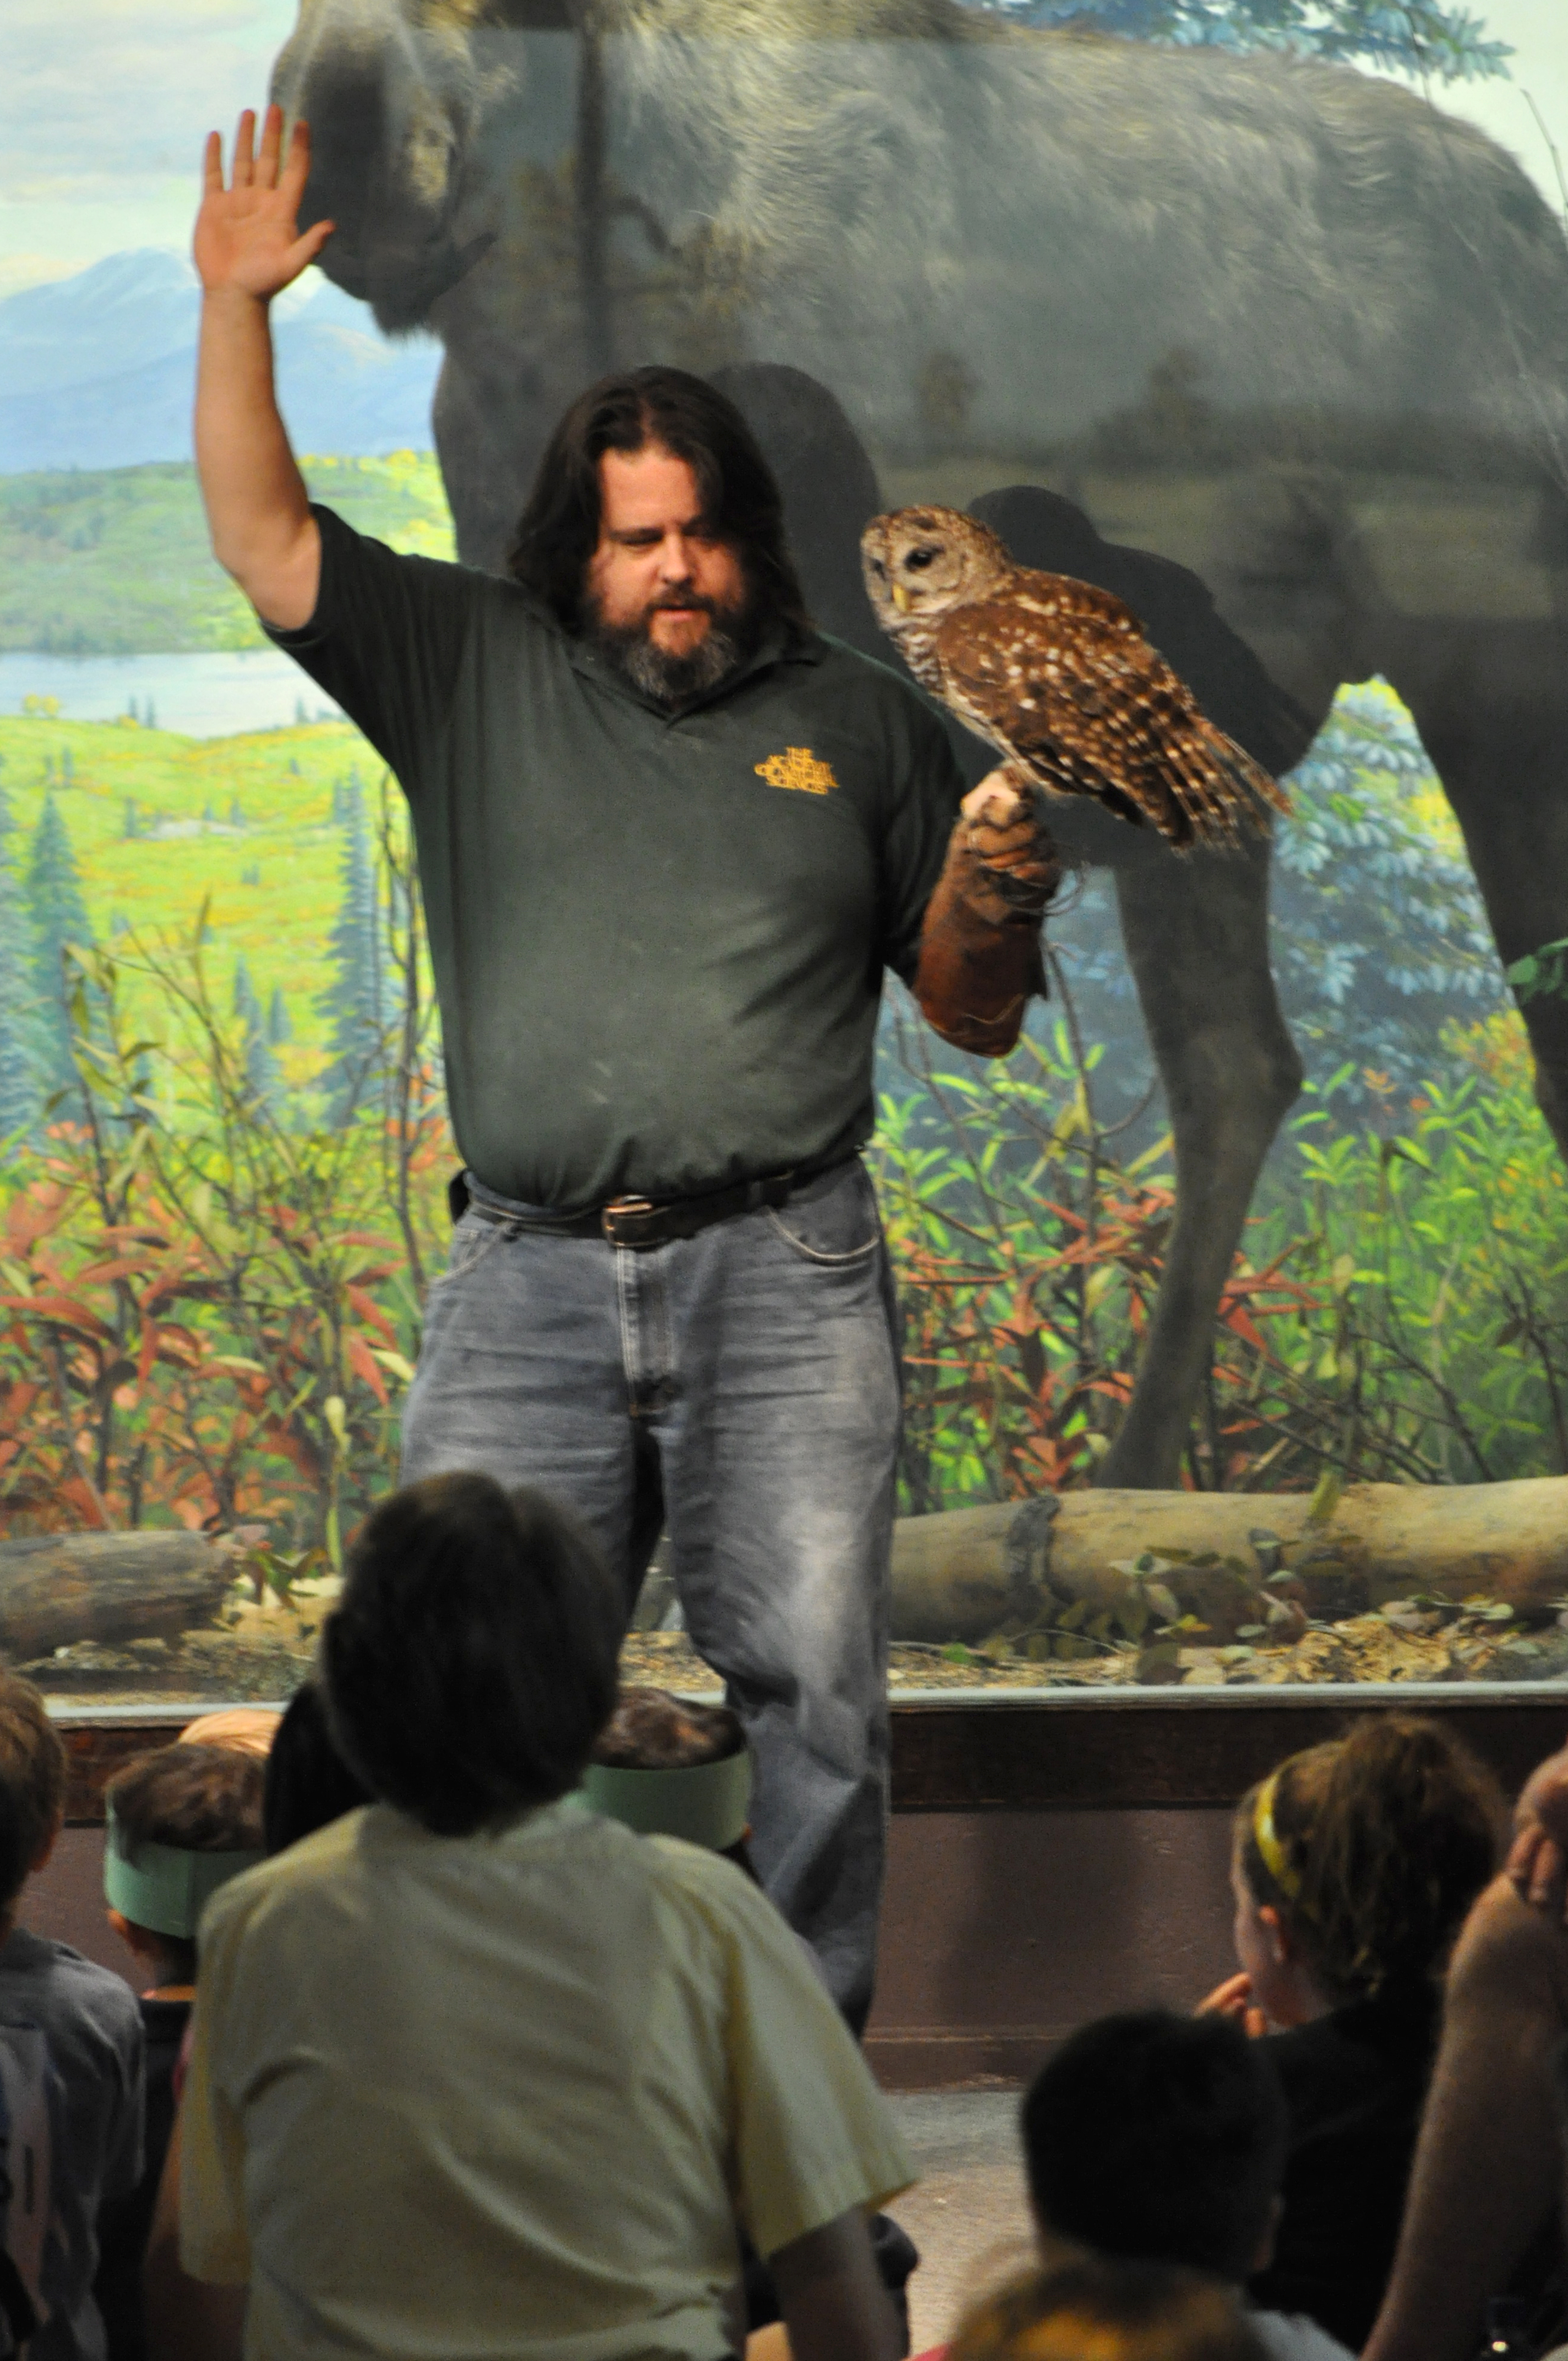 Live animal show at academy of sciences